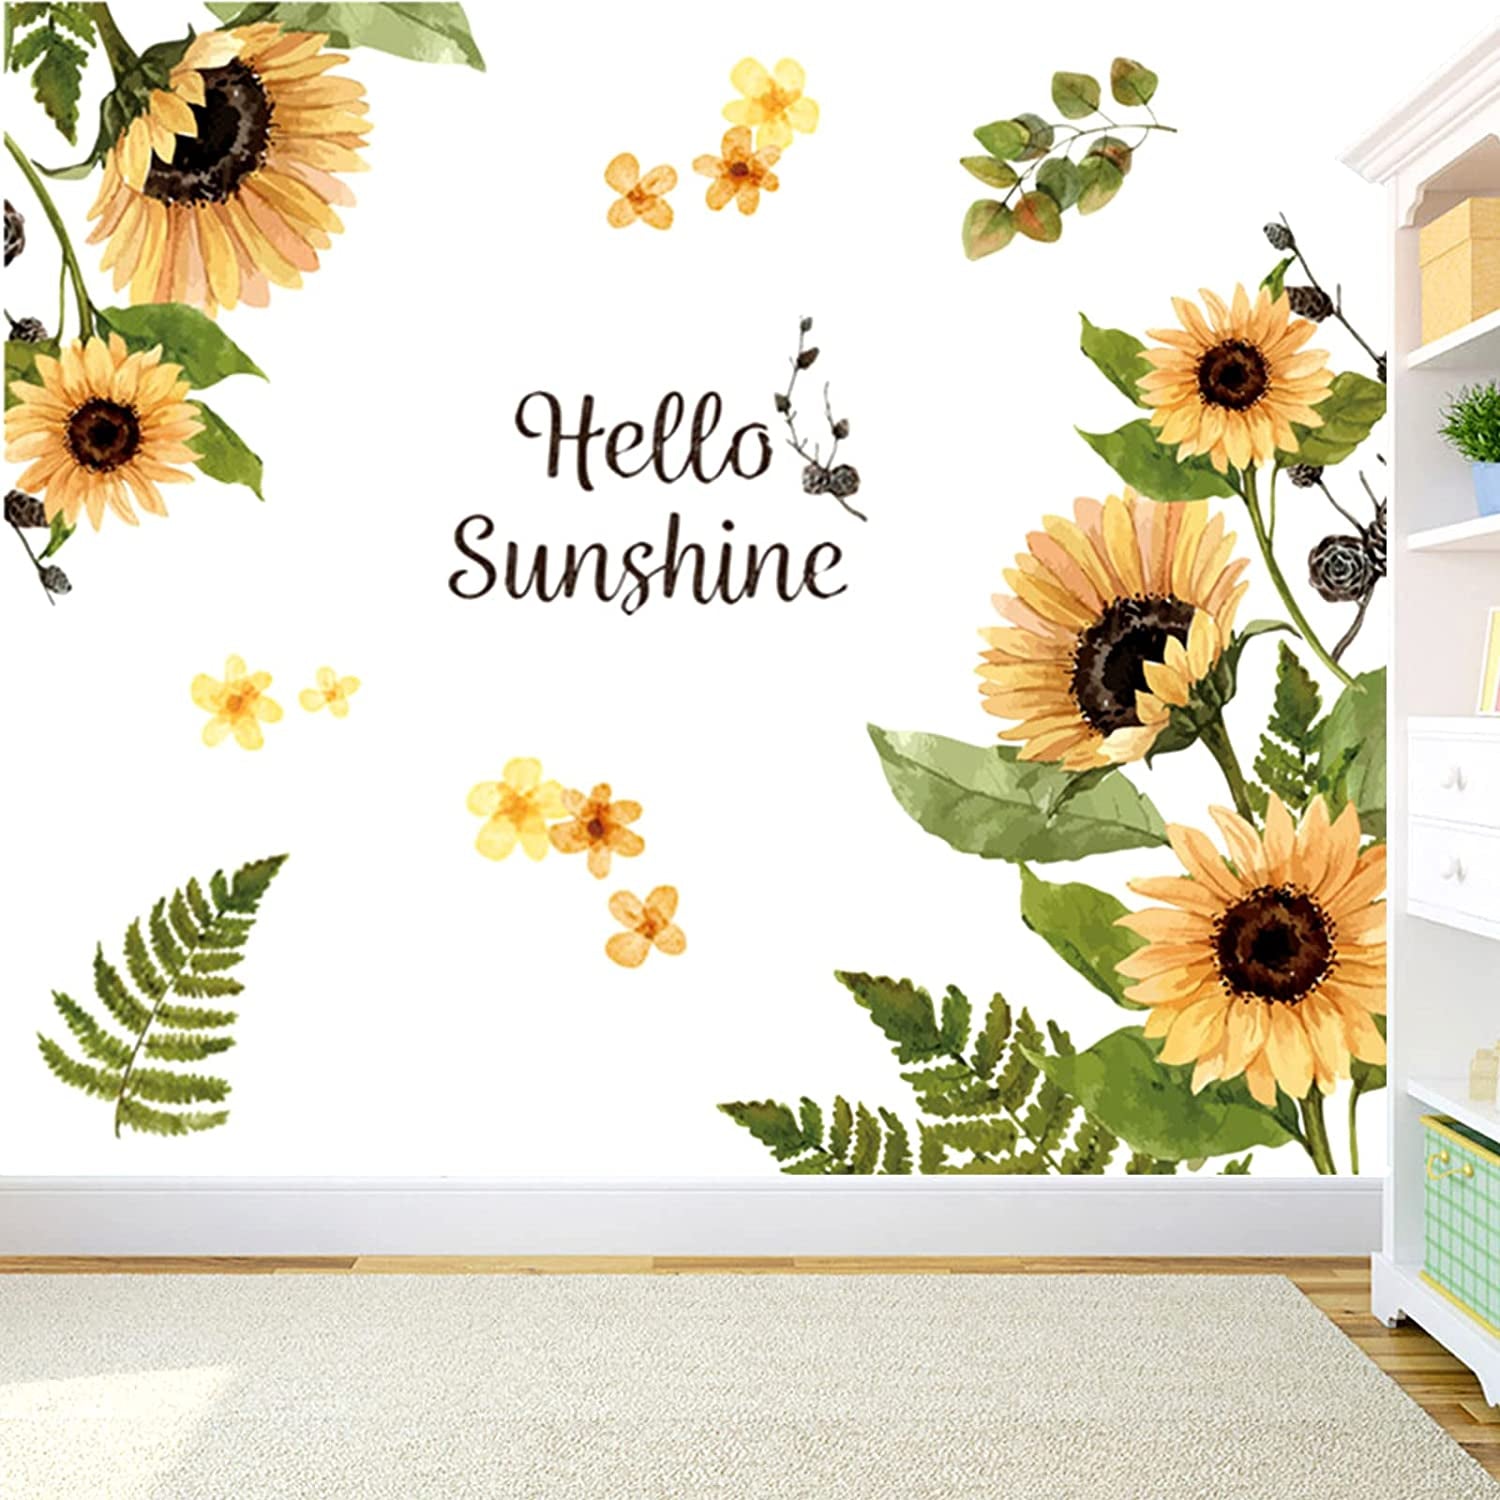 NASHRIO, Large Sunflower Wall Stickers, Removable and Water Proof Wall Art Stickers, Flower Wall Stickers for Living Room, Bedroom, Background Wall, Decoration Stickers for Glass Door, Window, New Home Gift.